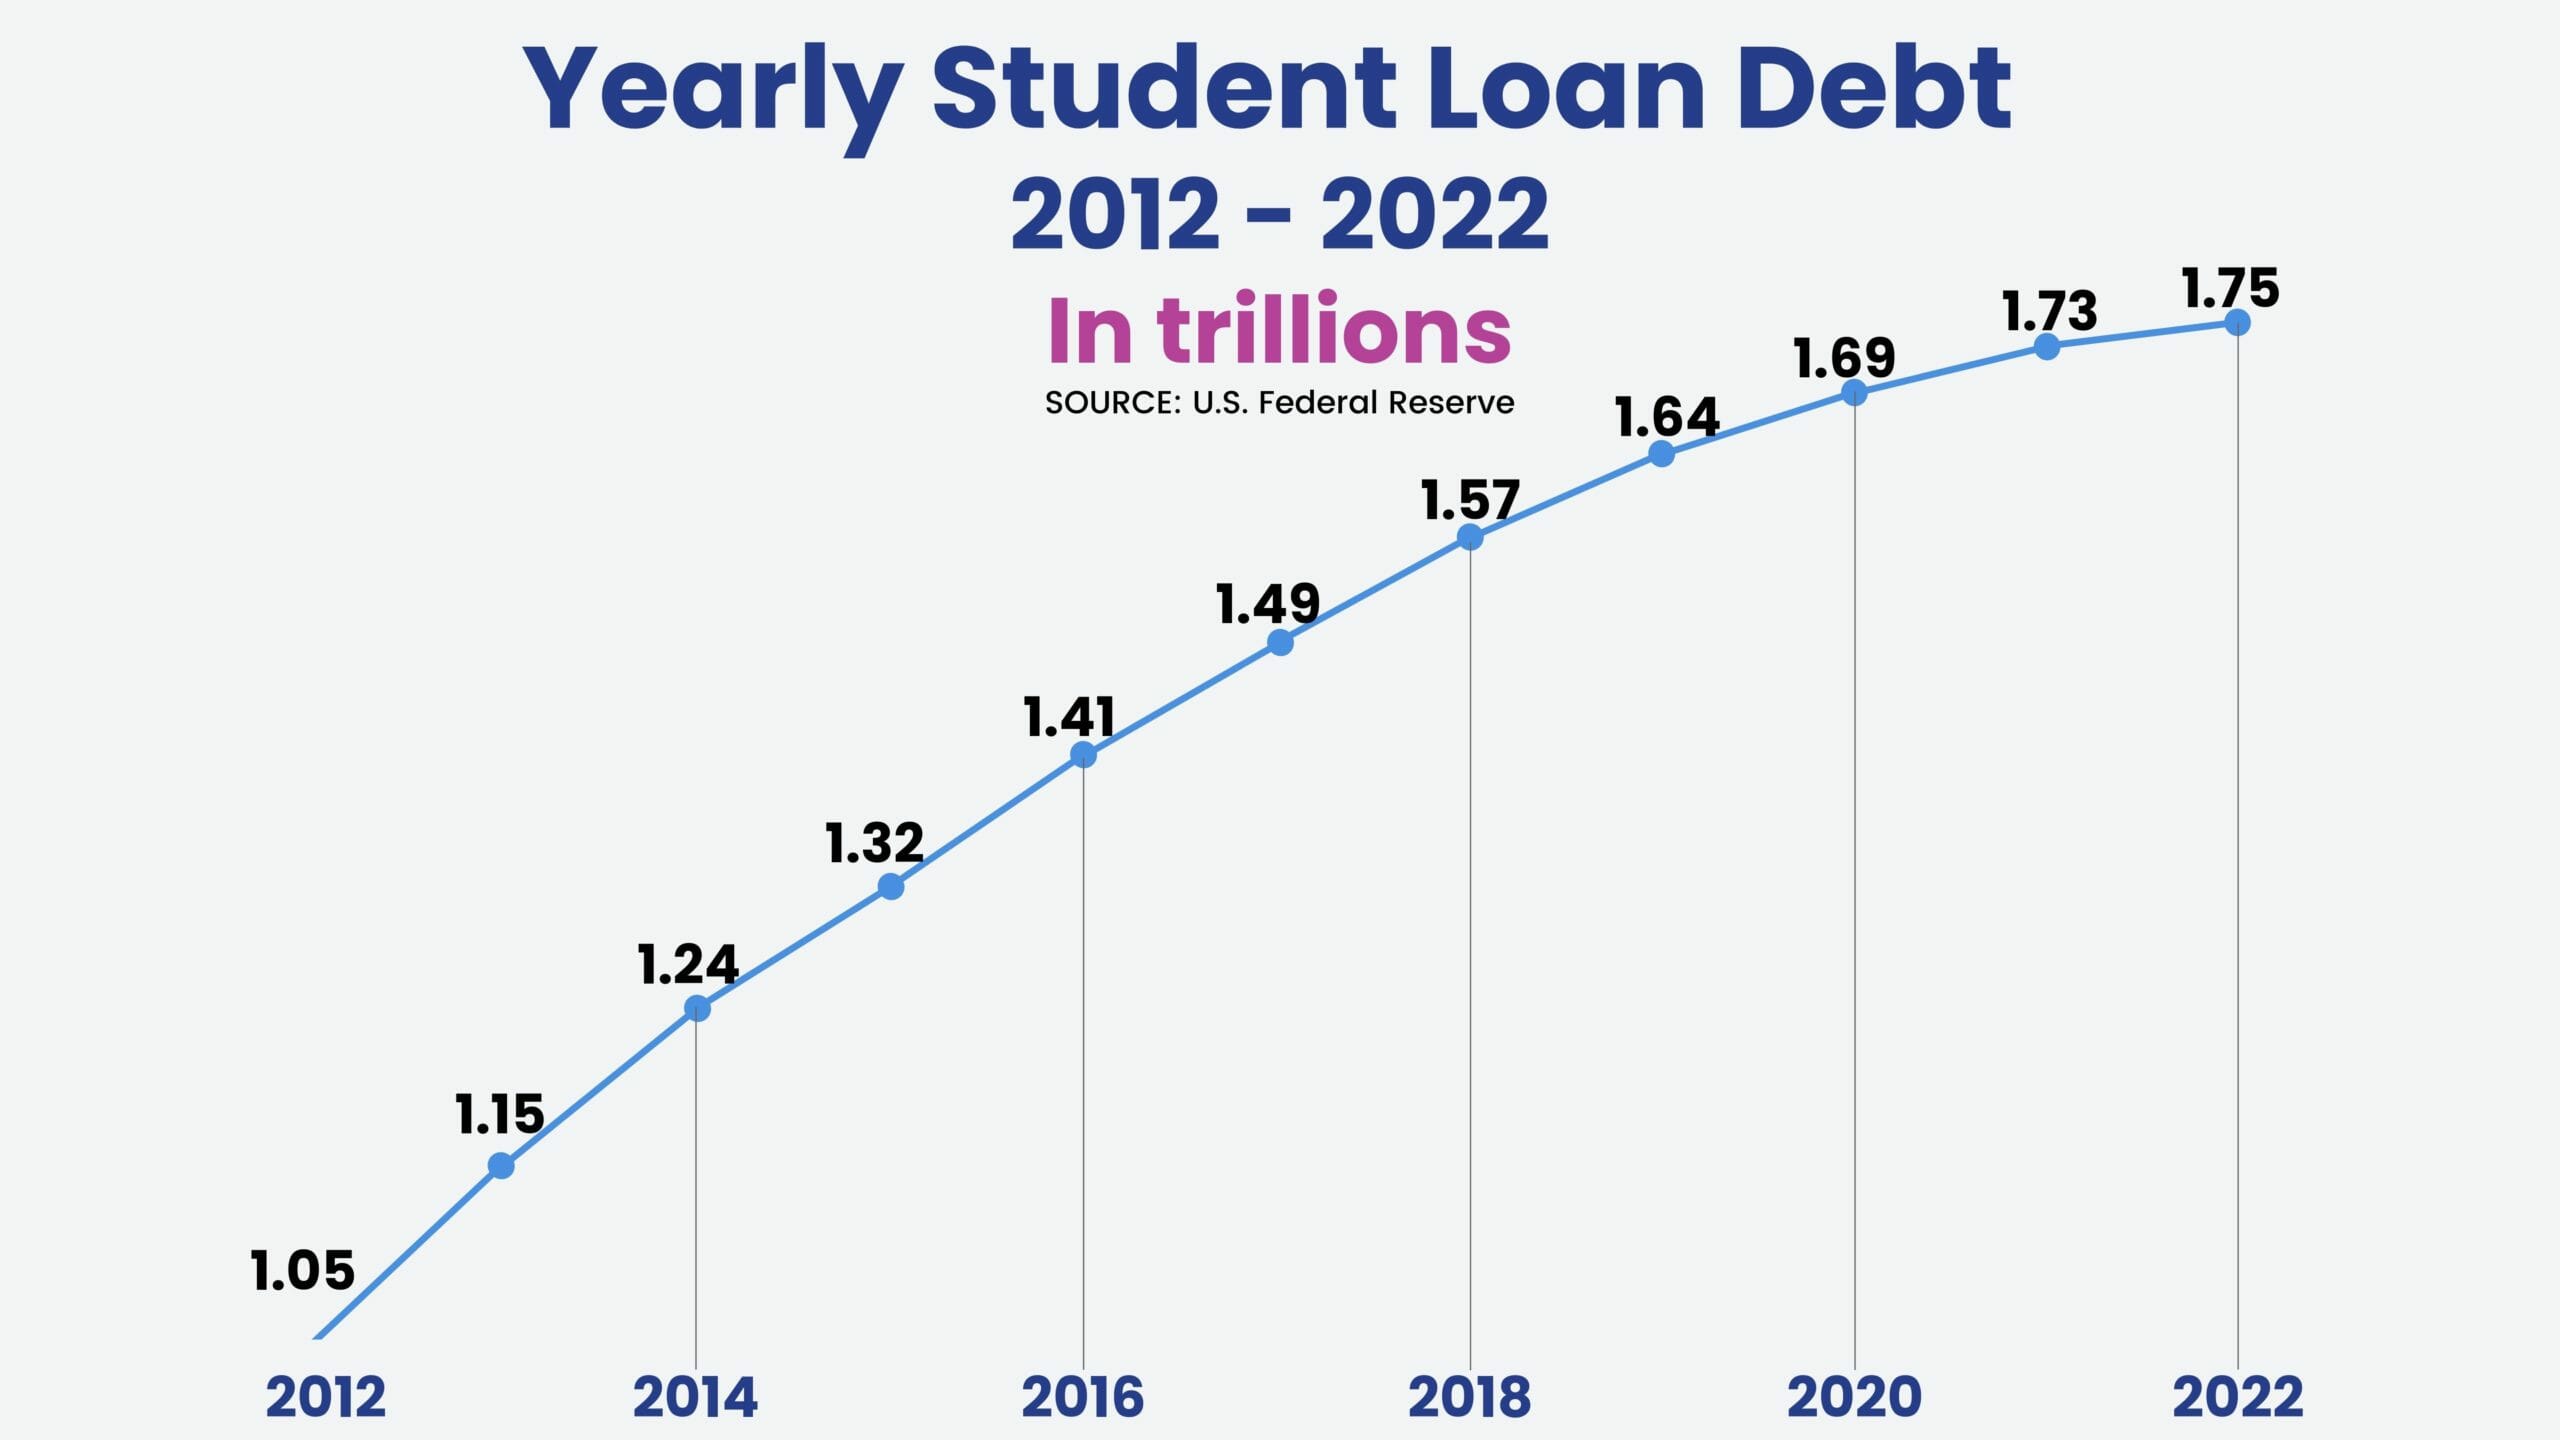 Line chart of student loan debt totals from 2012 to 2022